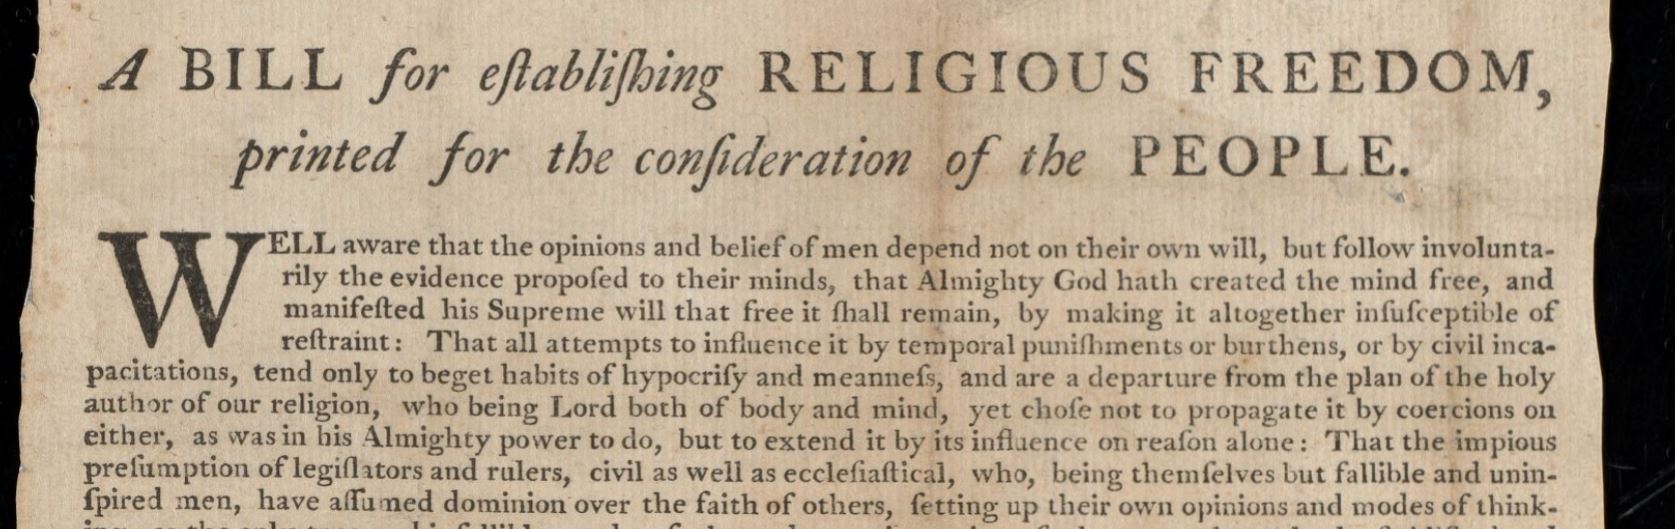 Beatings of Baptist ministers were among the incidents that led Thomas Jefferson to publish a broadside in Williamsburg in 1779 about a bill to establish religious freedom in Virginia, and for James Madison to later propose an amendment to the US Constitution guaranteeing religious freedom.